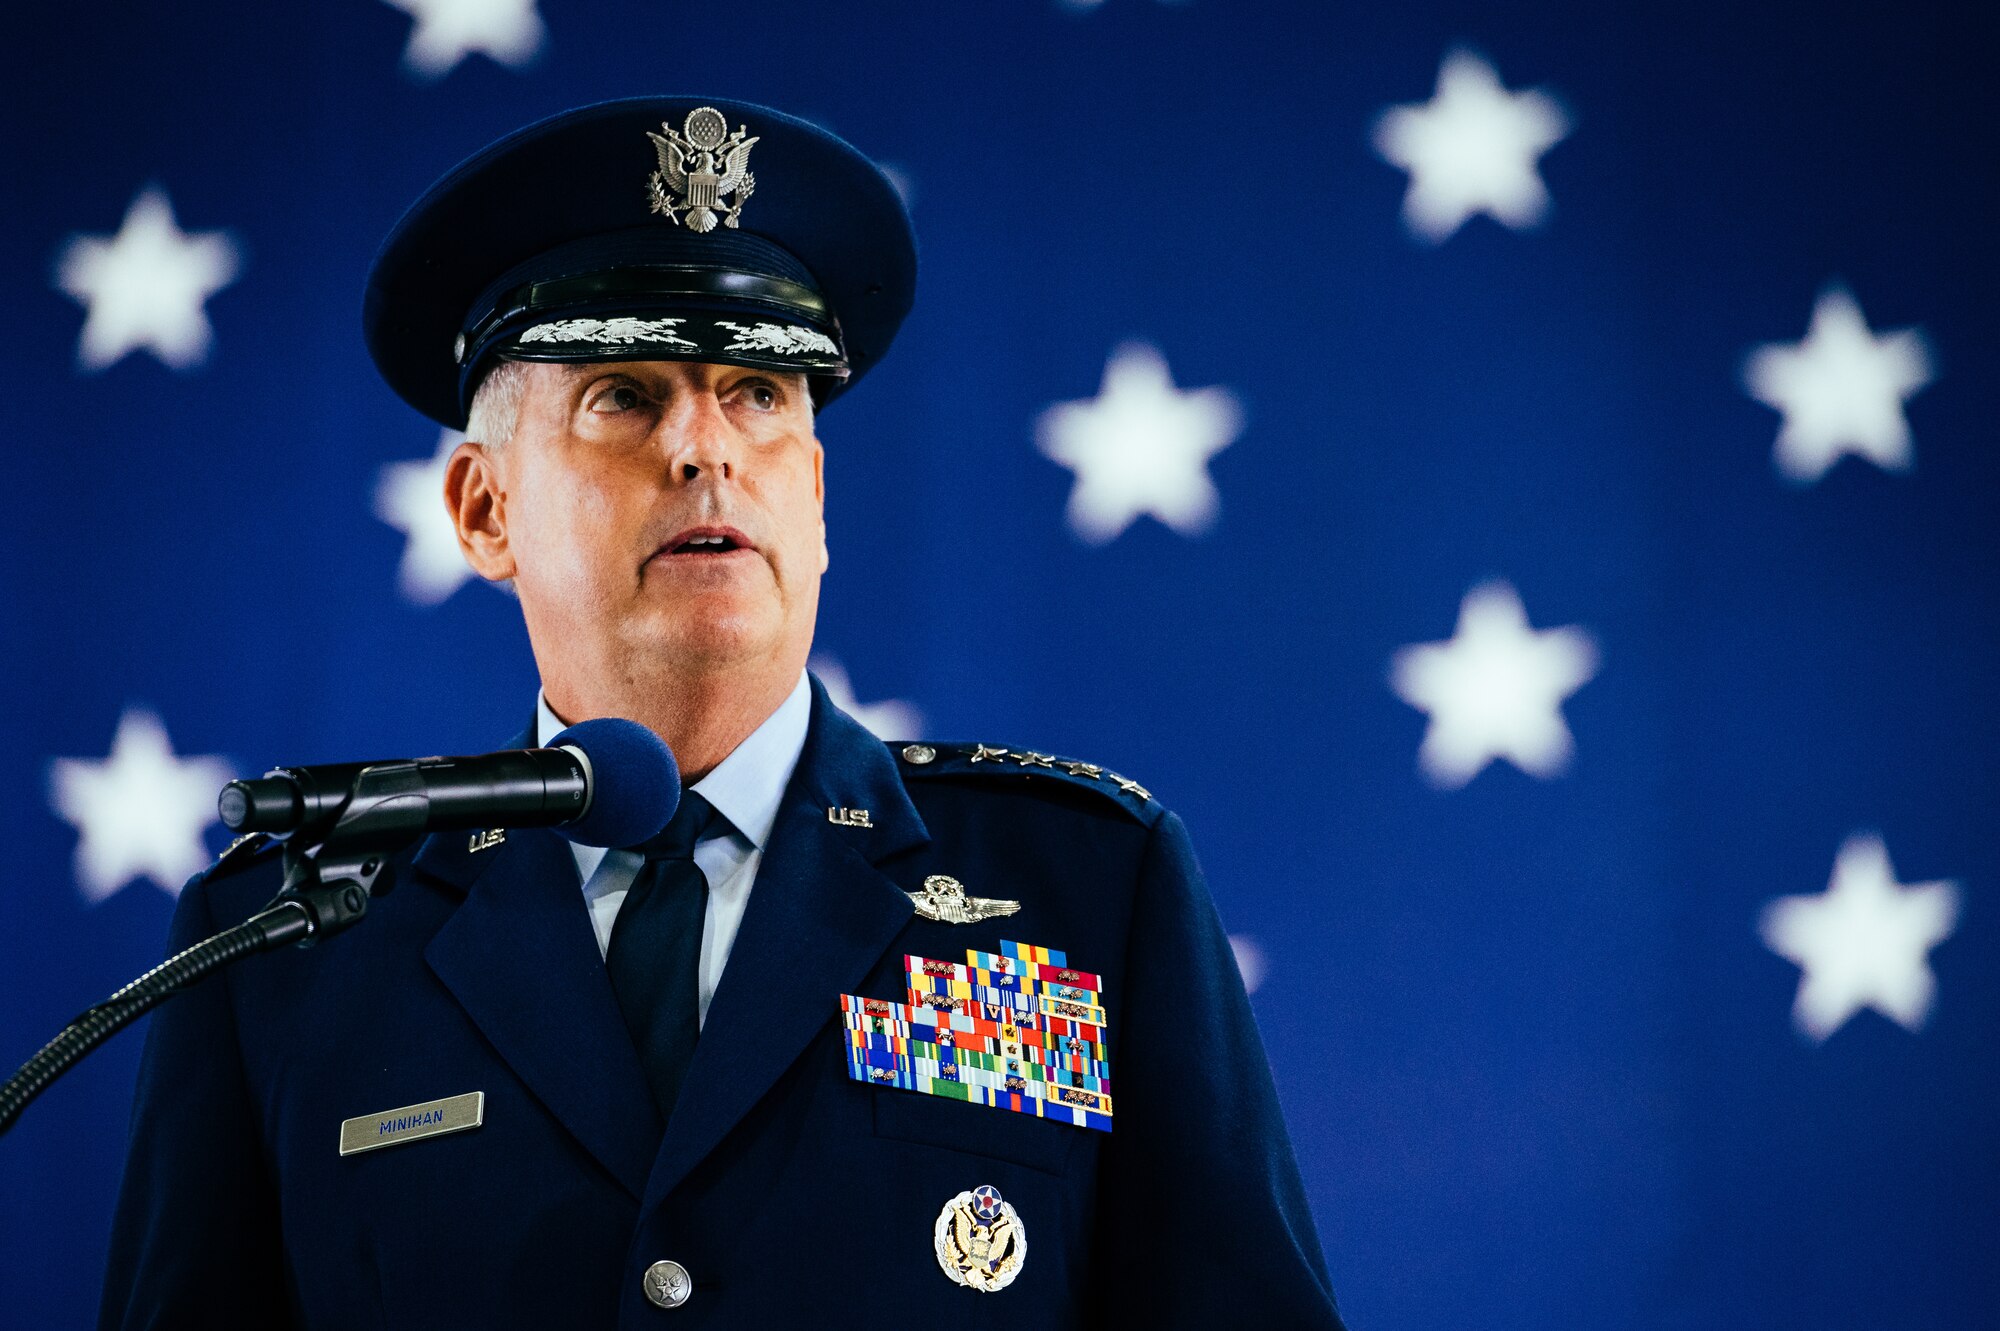 U.S. Air Force Gen. Mike Minihan, incoming Air Mobility Command commander, gives a speech at Scott Air Force Base, Illinois, Oct. 5, 2021. Minihan, succeeded Gen. Jacqueline D. Van Ovost. (U.S. Air Force Photo by Airman 1st Class Isaac Olivera)